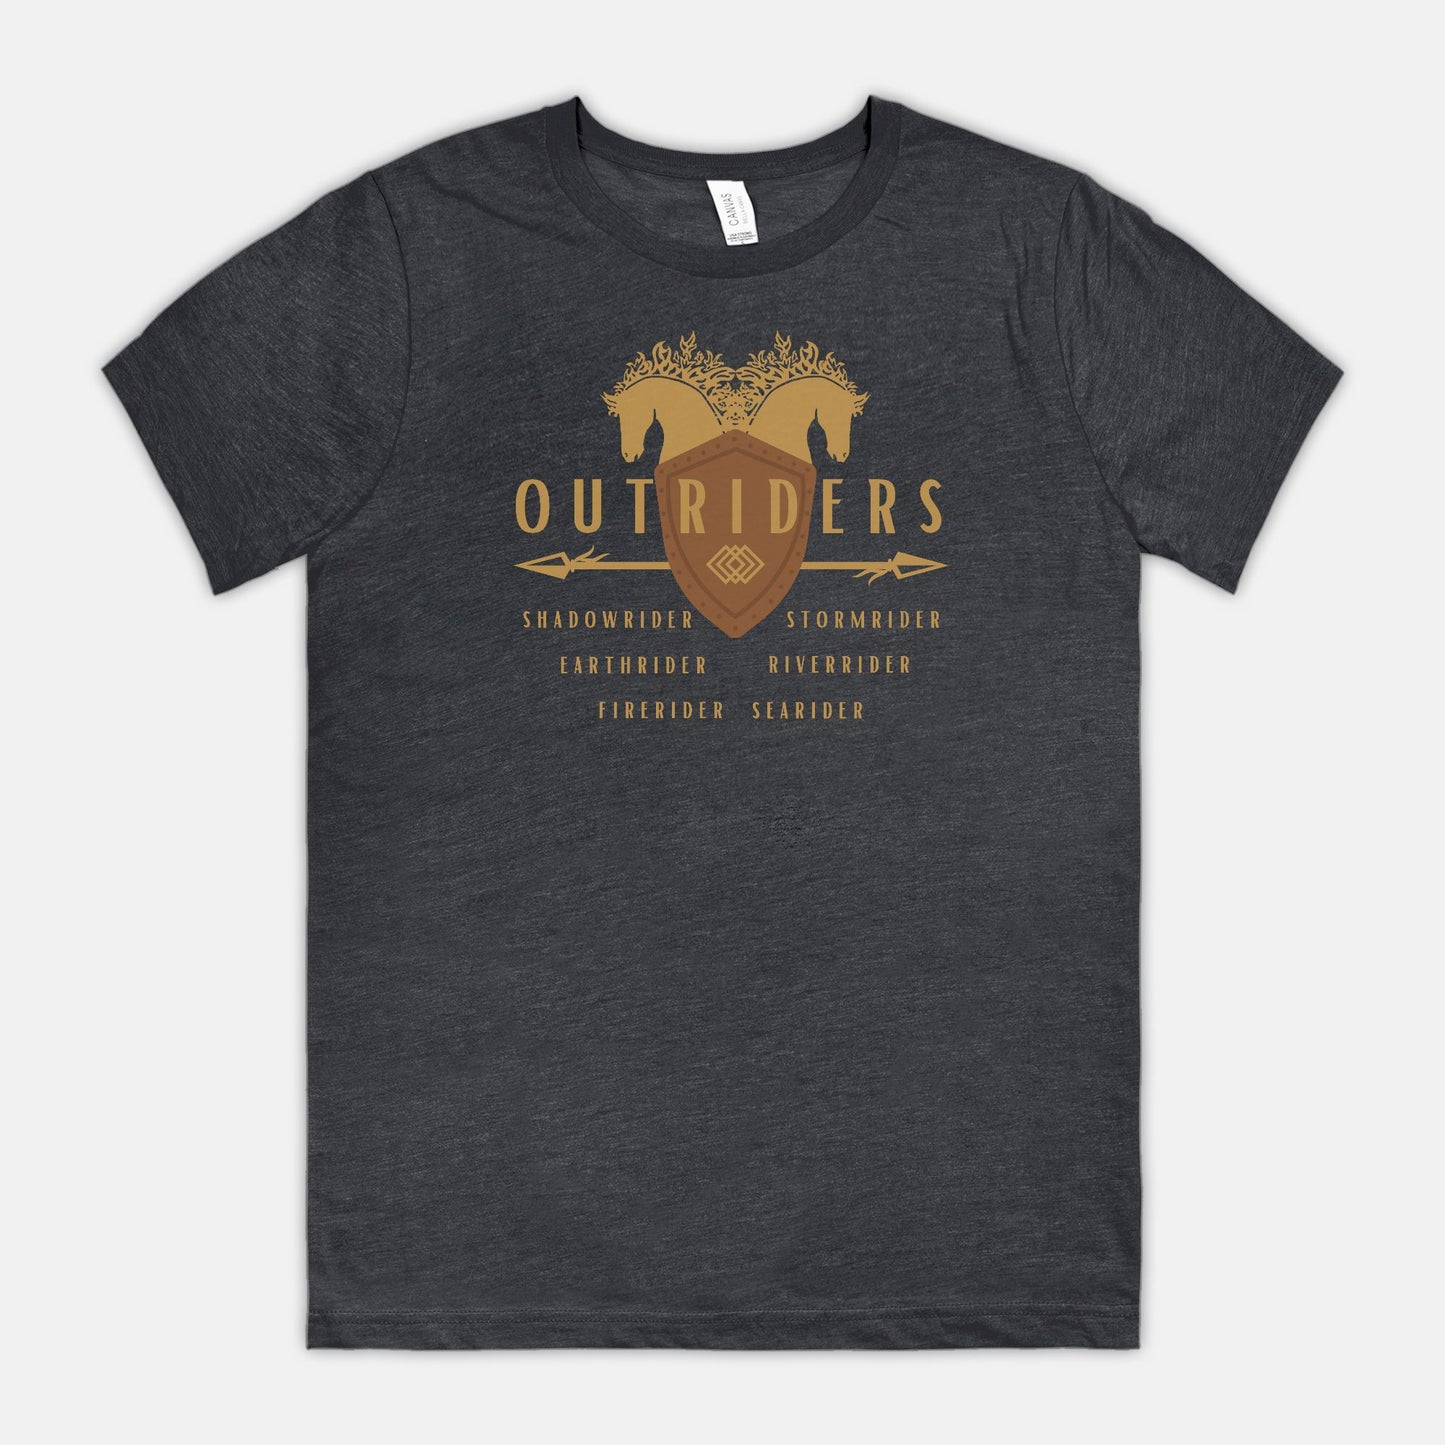 Outriders T-Shirt